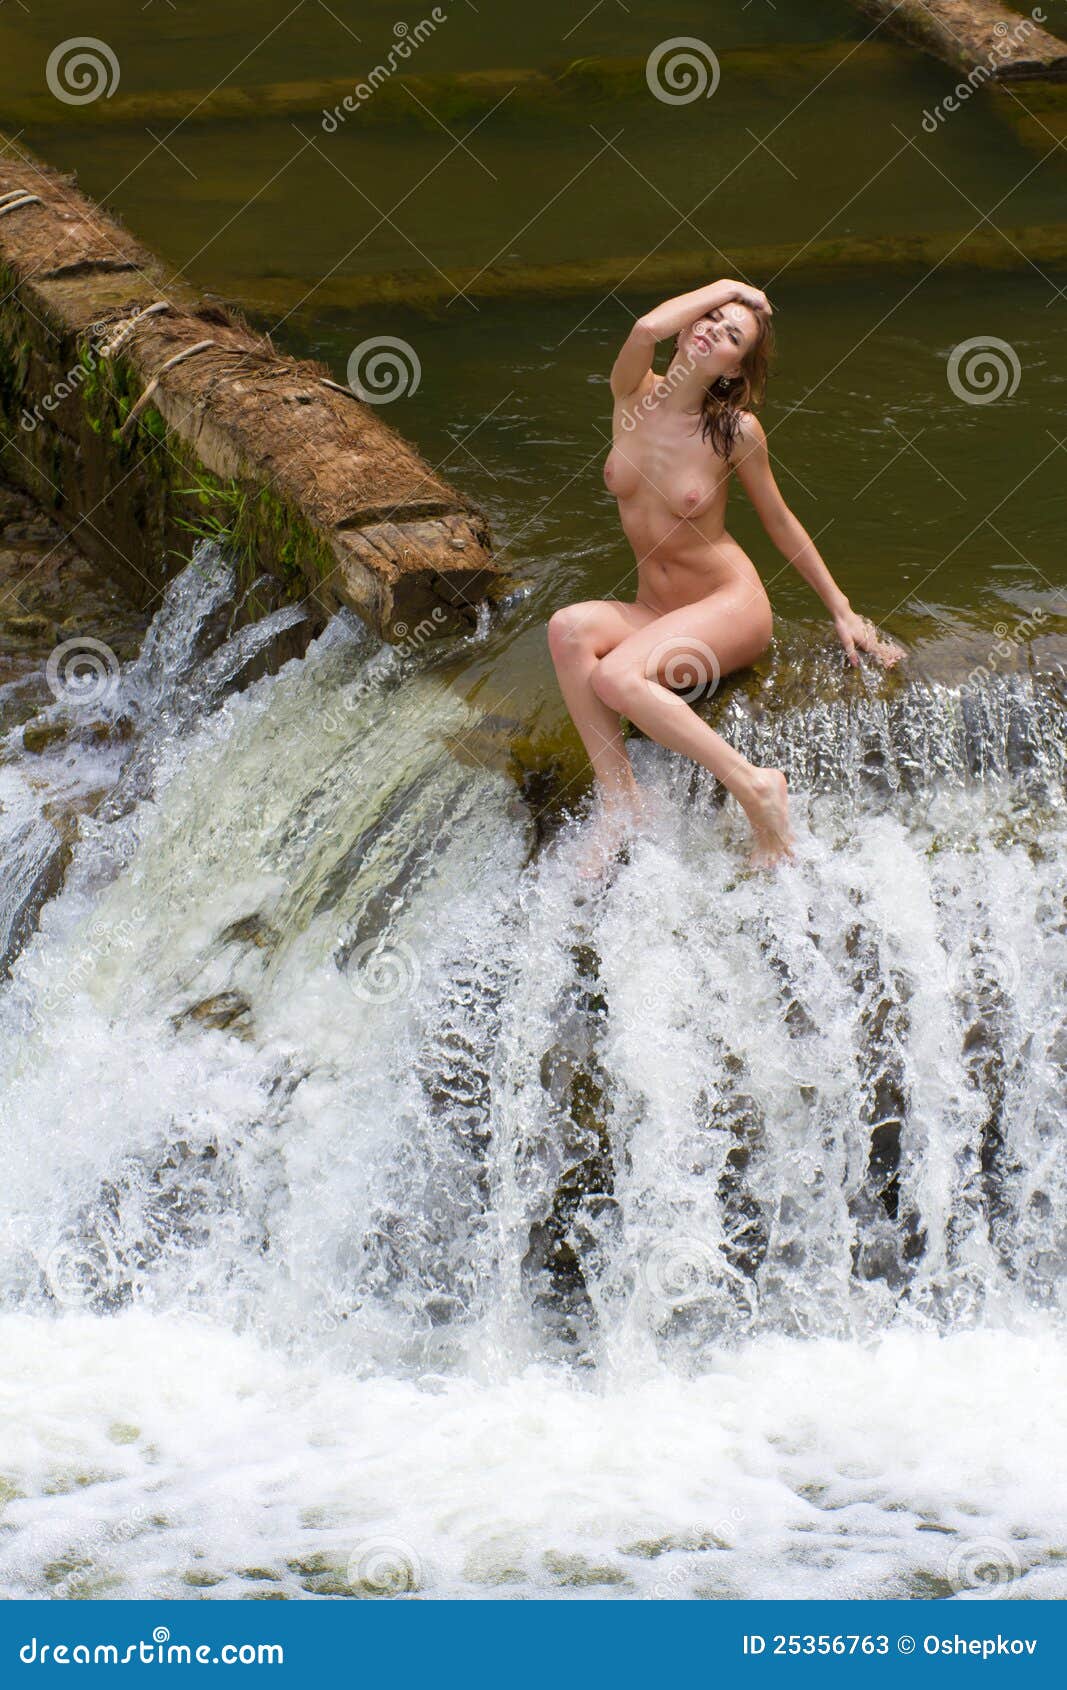 Naked Girl Sitting by a Waterfall pic